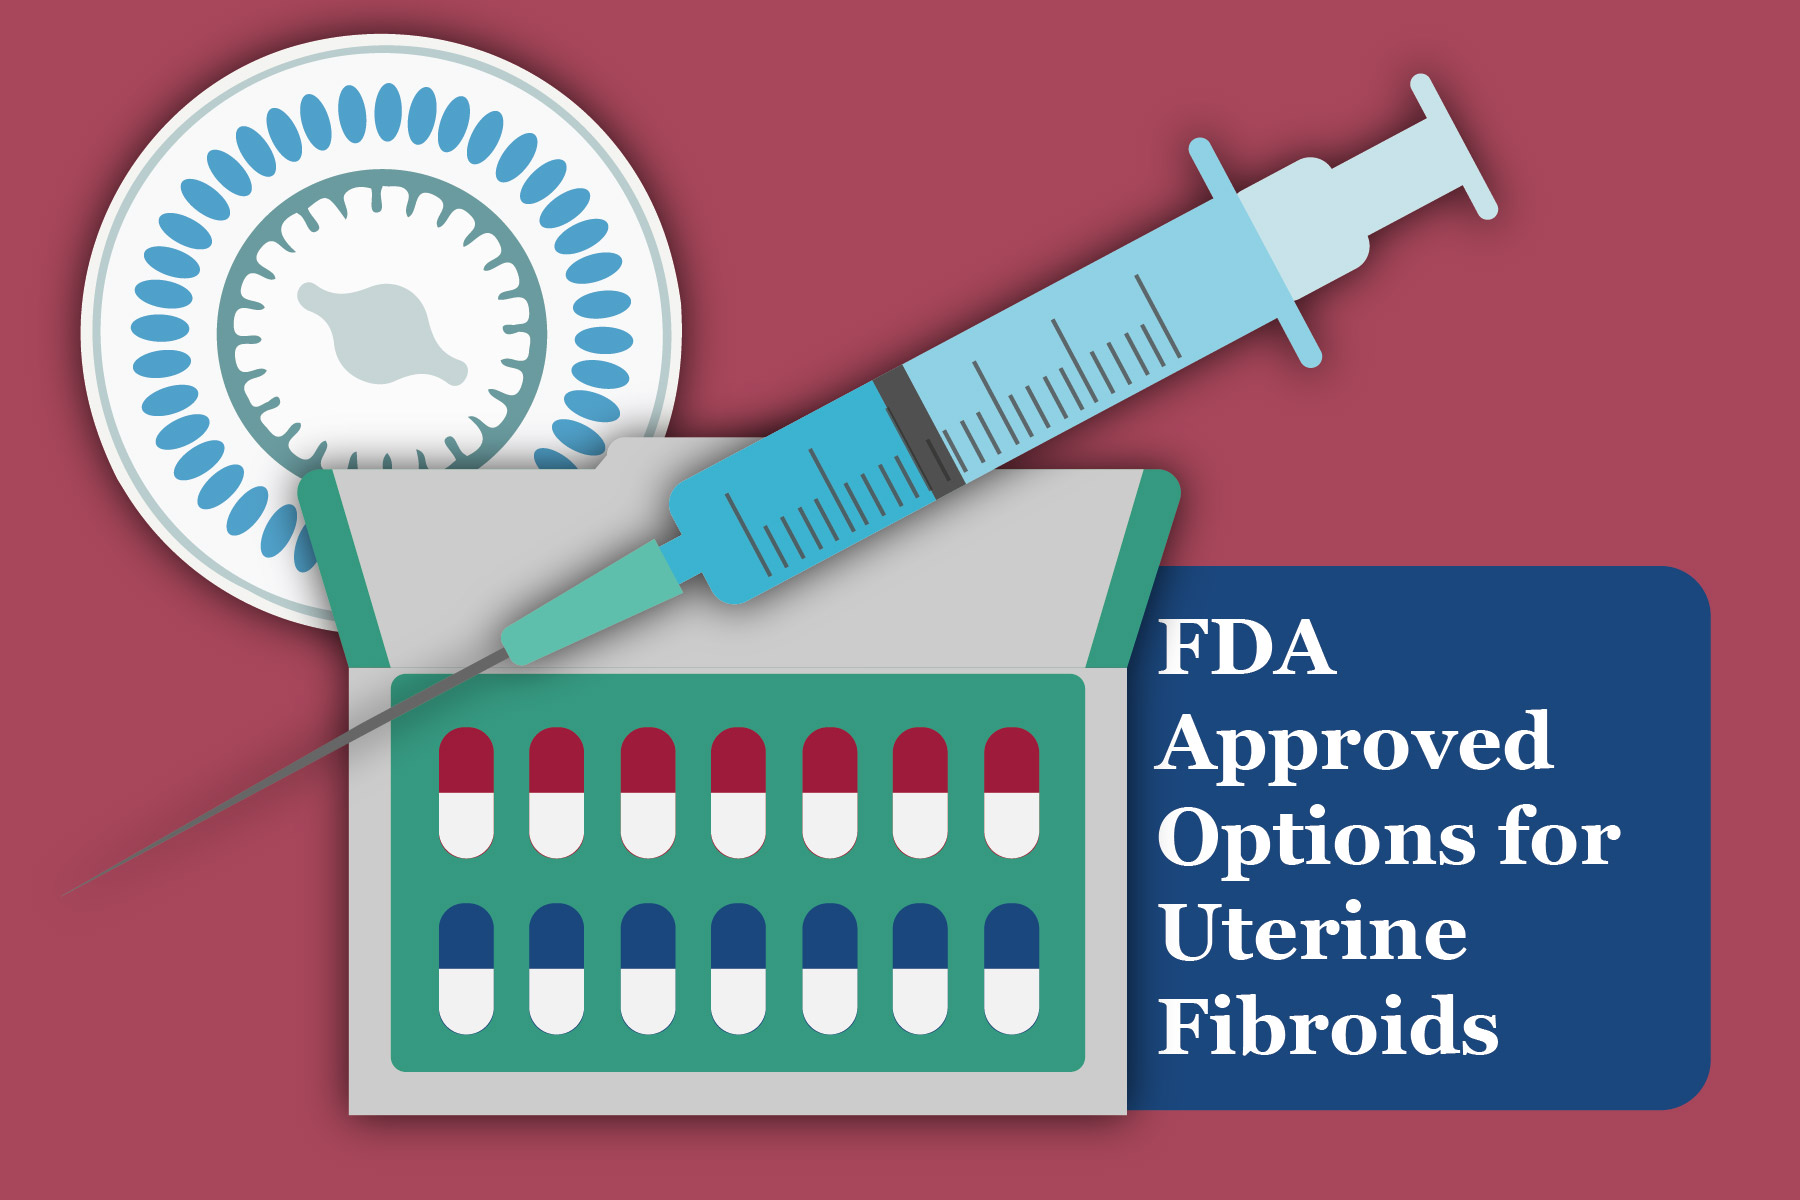 FDA Approved Options for Uterine Fibroids